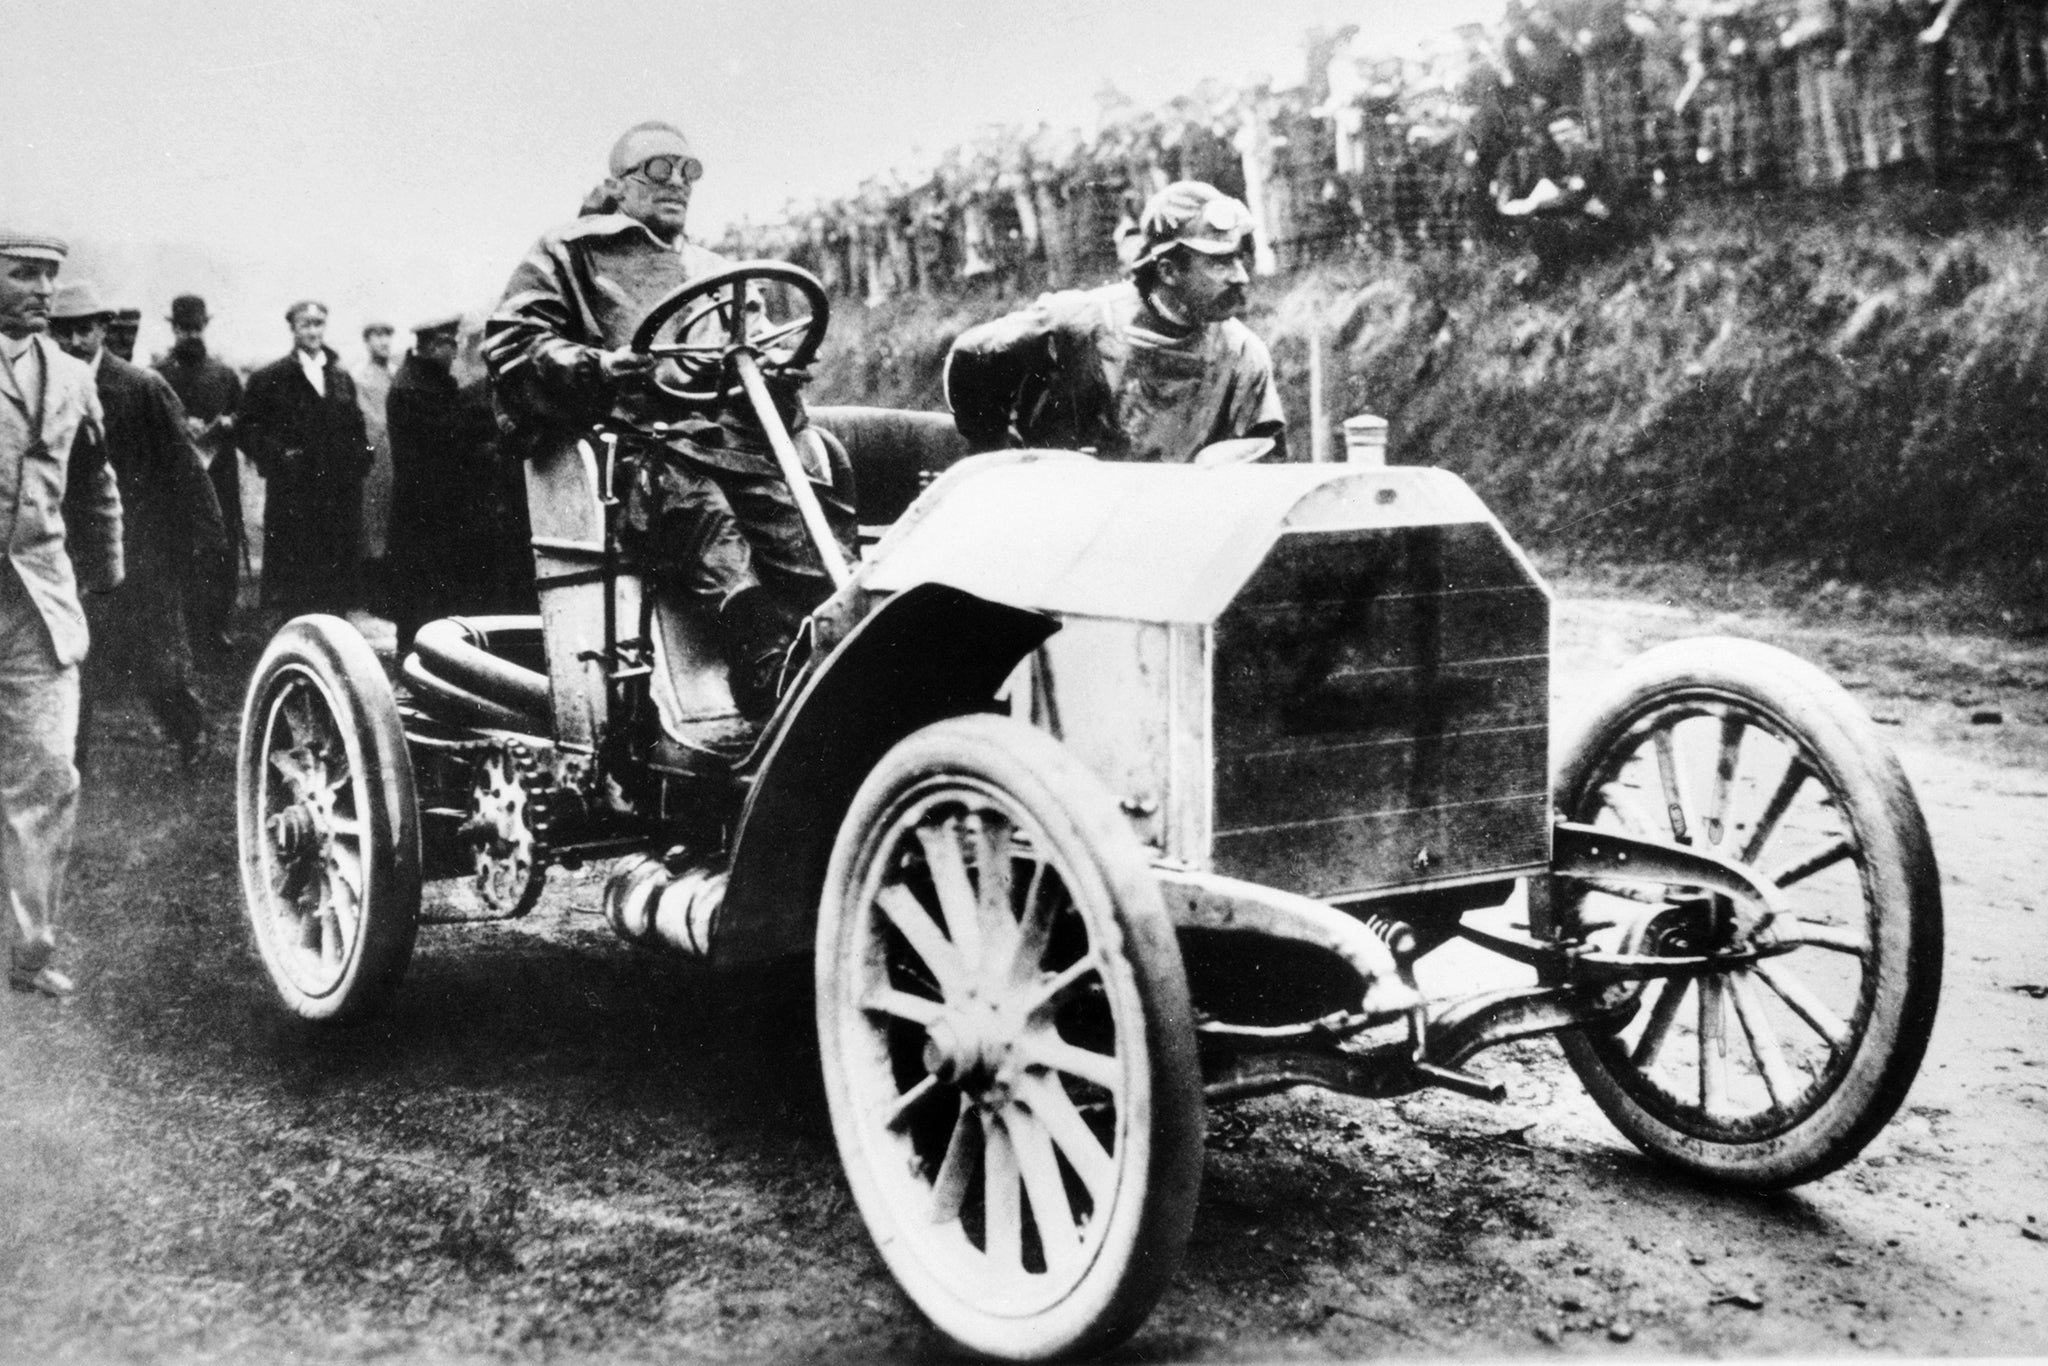 Camille Jenatzy in his 60 hp Mercedes, winner of the Gordon Bennett Race, Athy, Ireland, 1903. This car was one of the fastest of its day, being capable of 75 mph. The Gordon Bennett Races held in the early 1900s were a forerunner of modern Grand Prix racing. (Photo by National Motor Museum/Heritage Images/Getty Images)